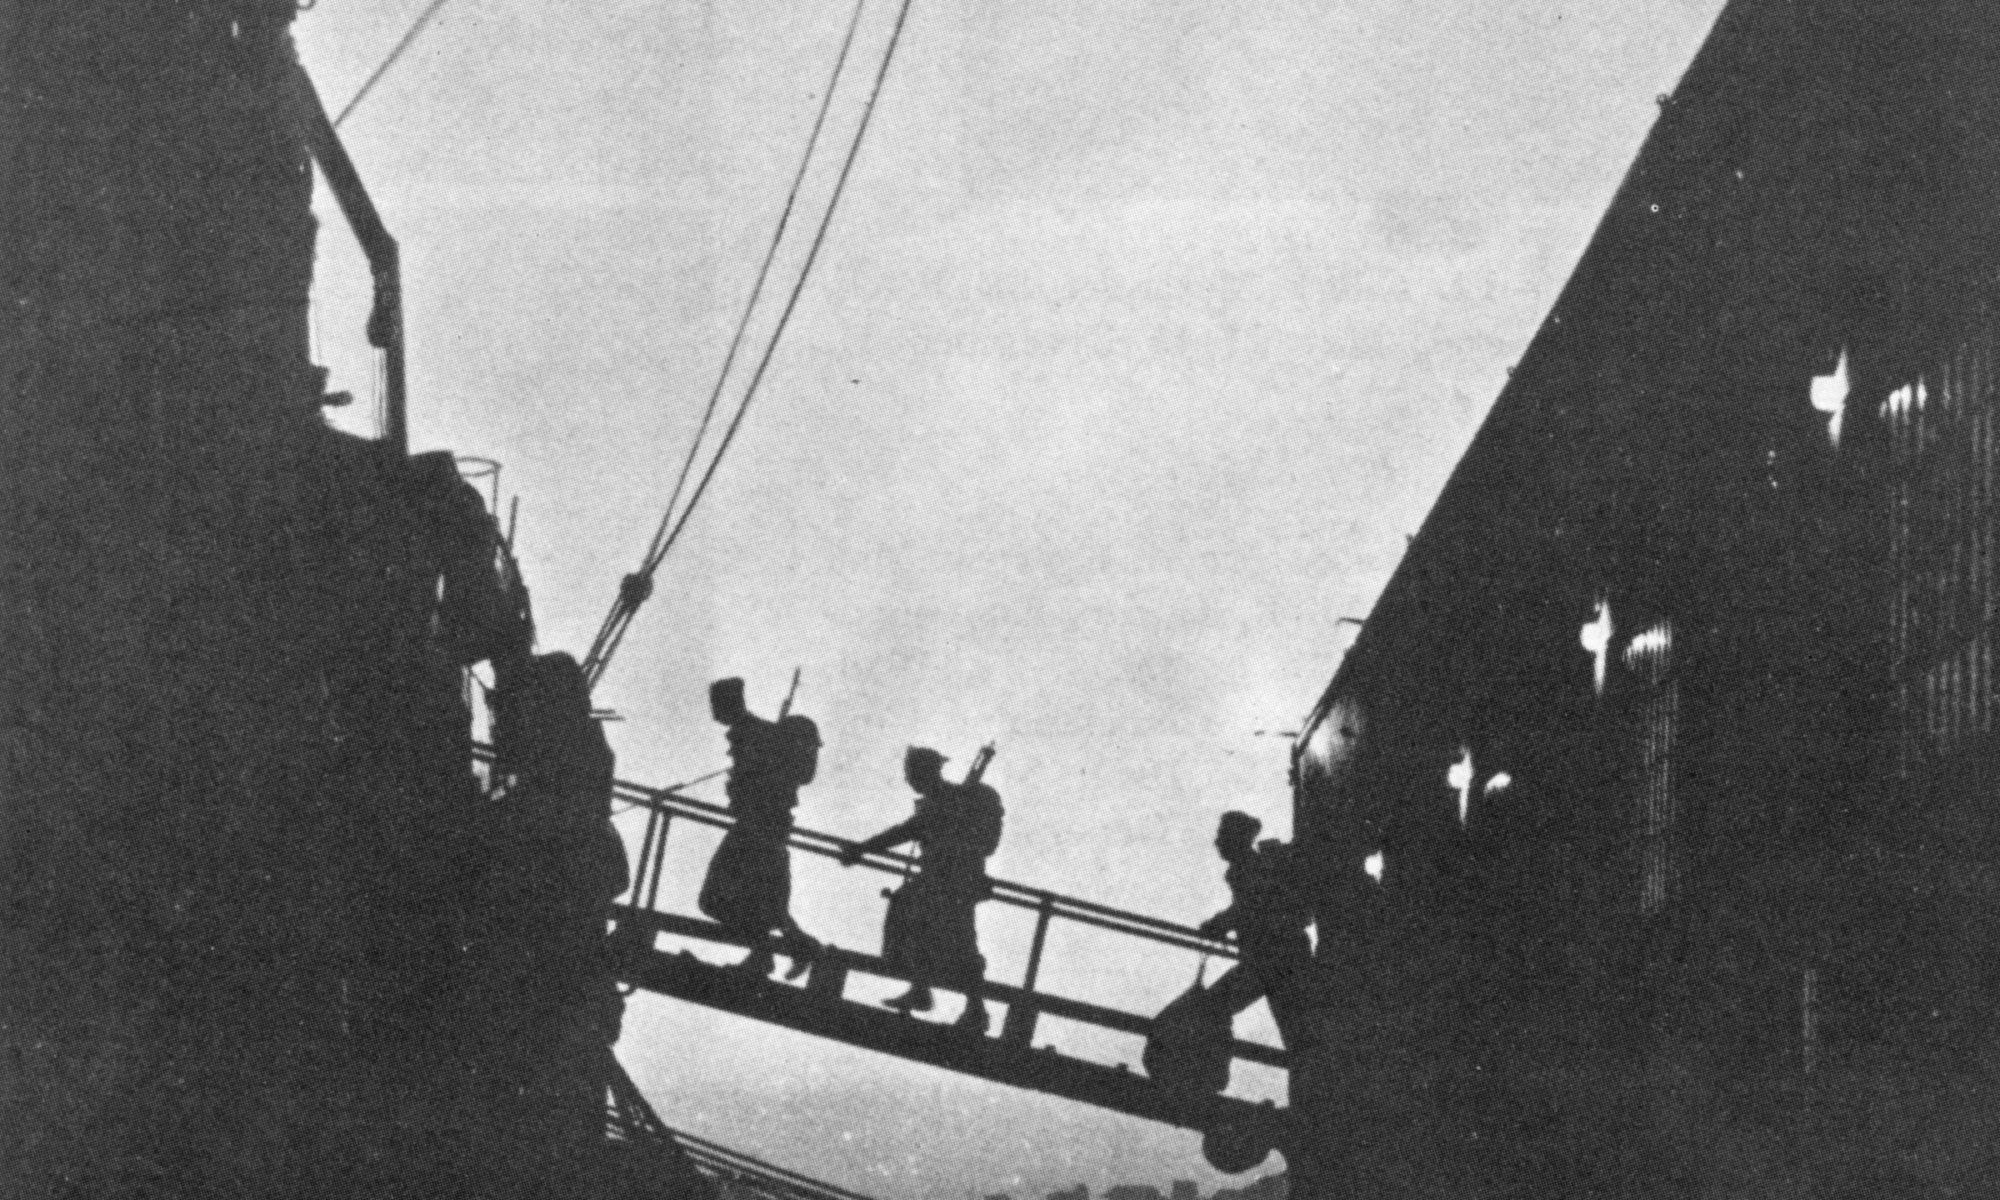 Black and white photo of two soldiers walking up a gangplank onto a ship at dusk.